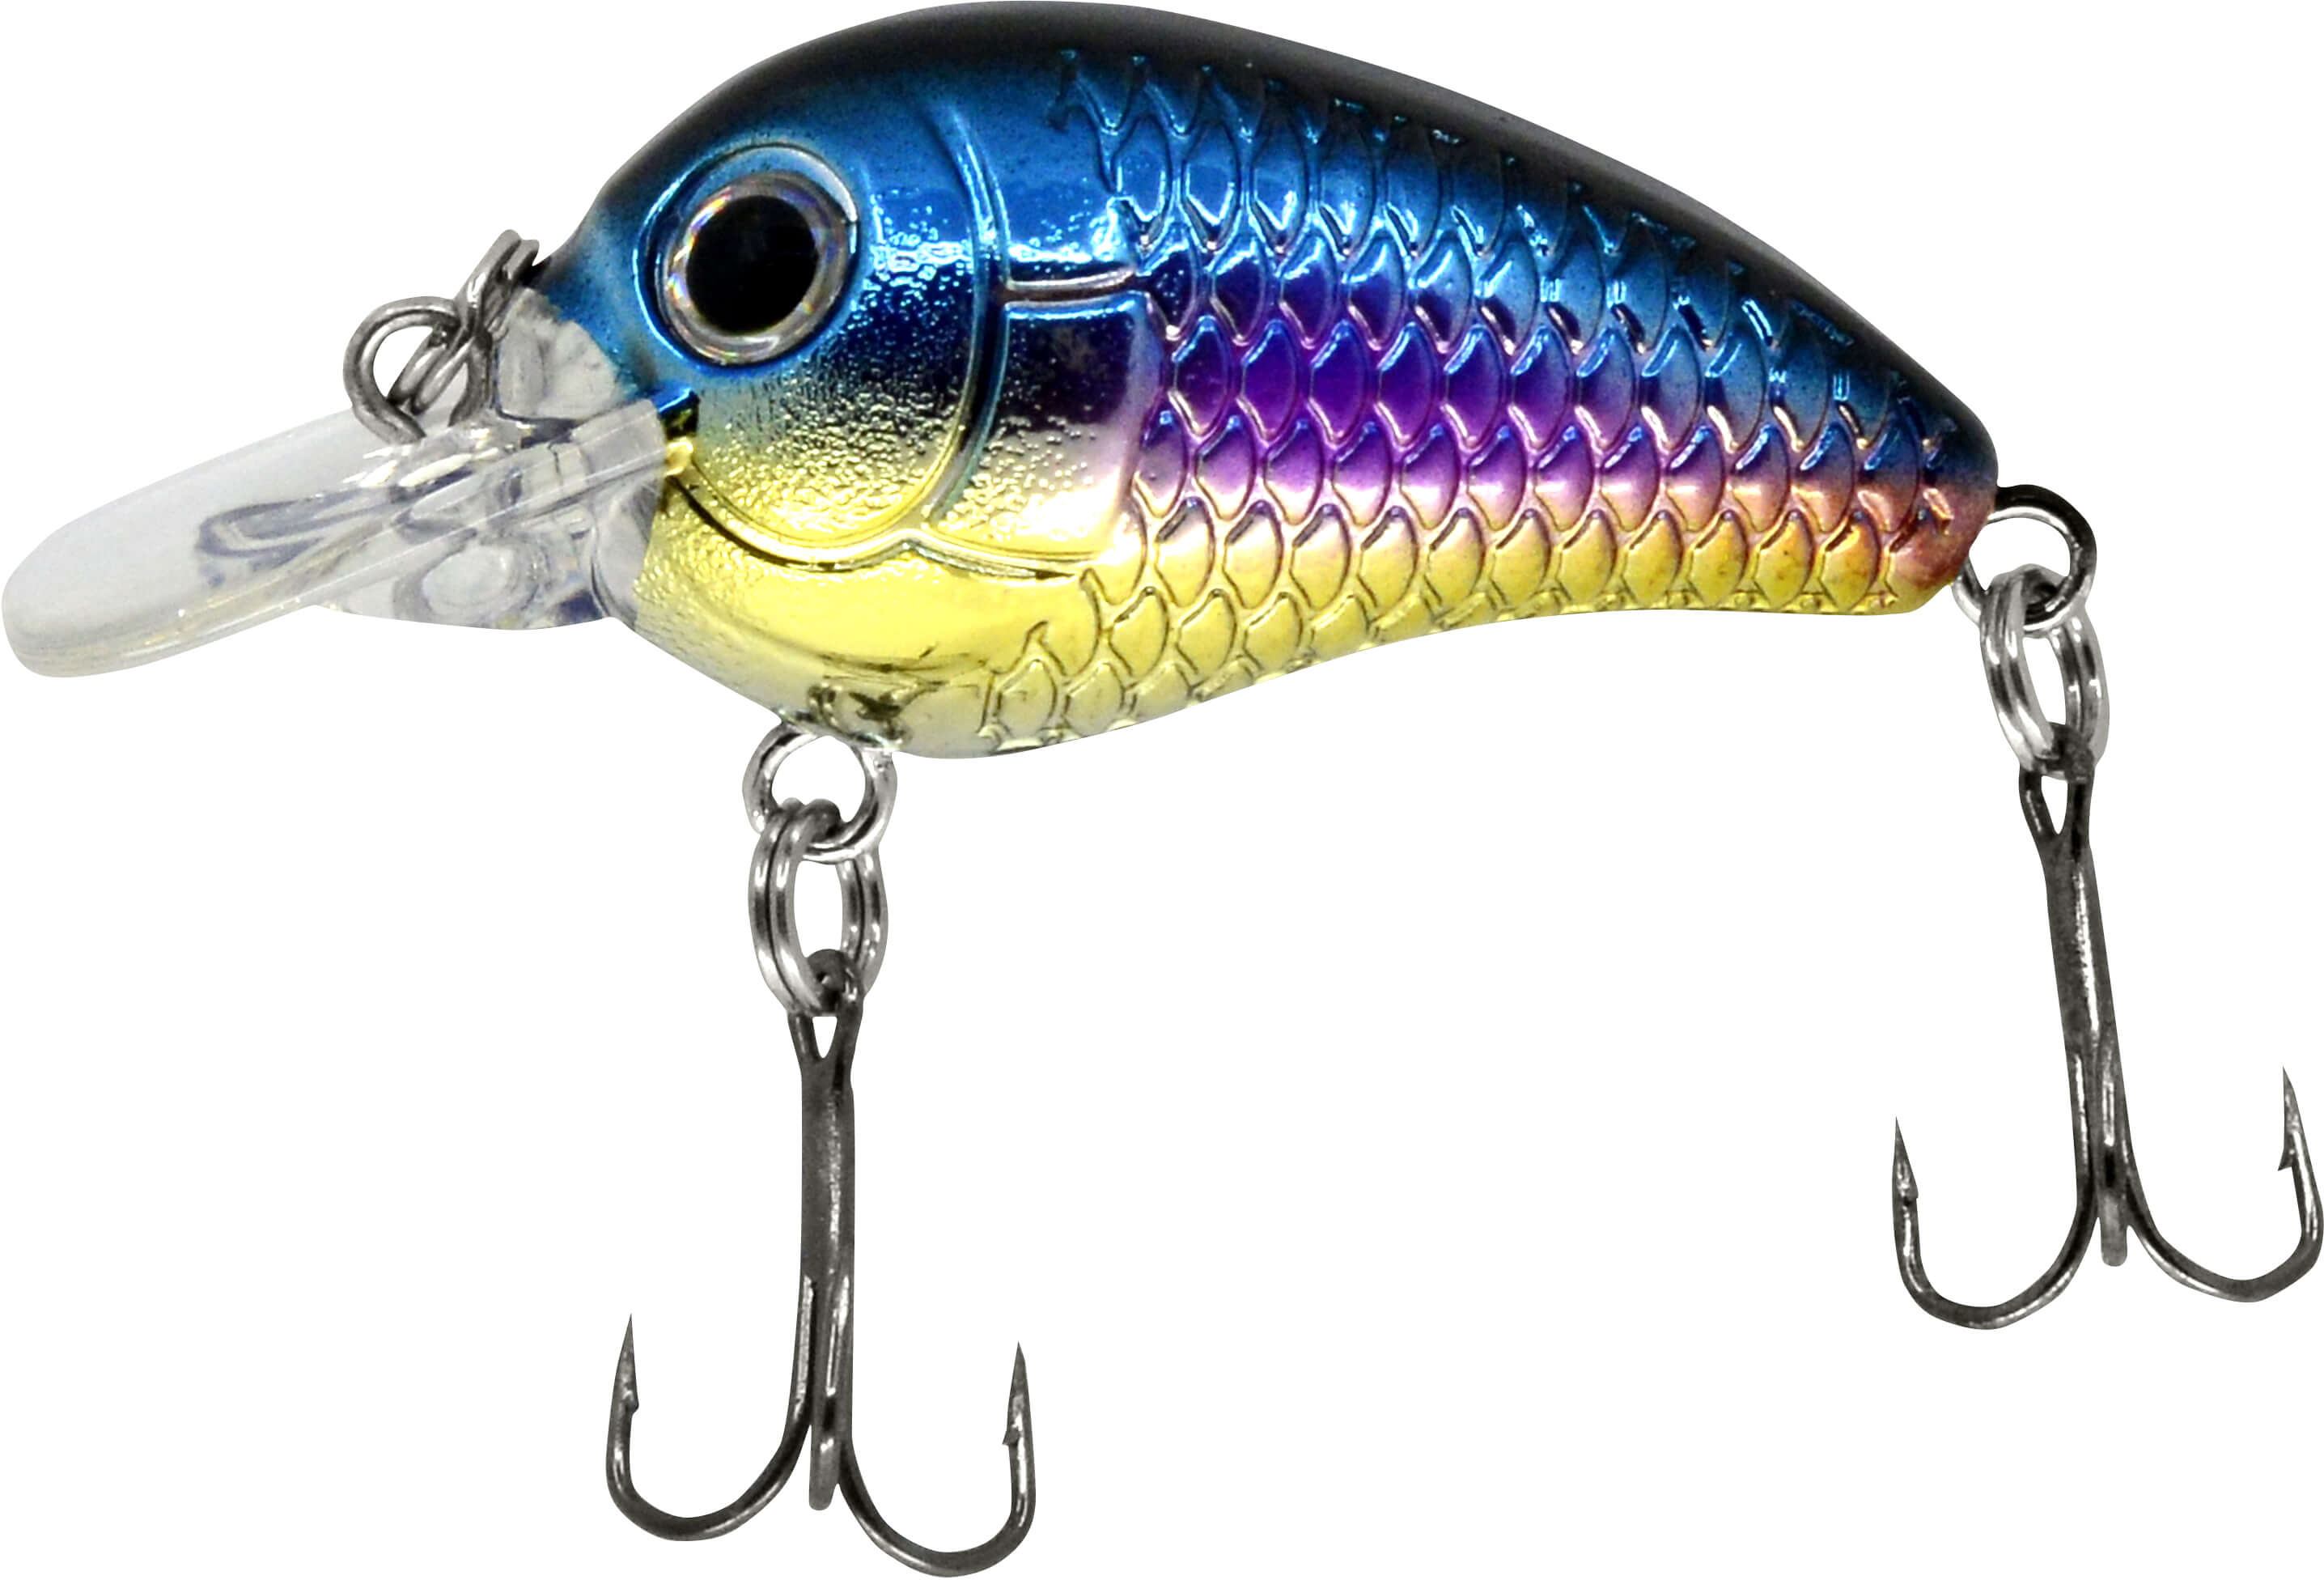 CHUBBS Panfish Square Bill  Up to 20% Off Free Shipping over $49!